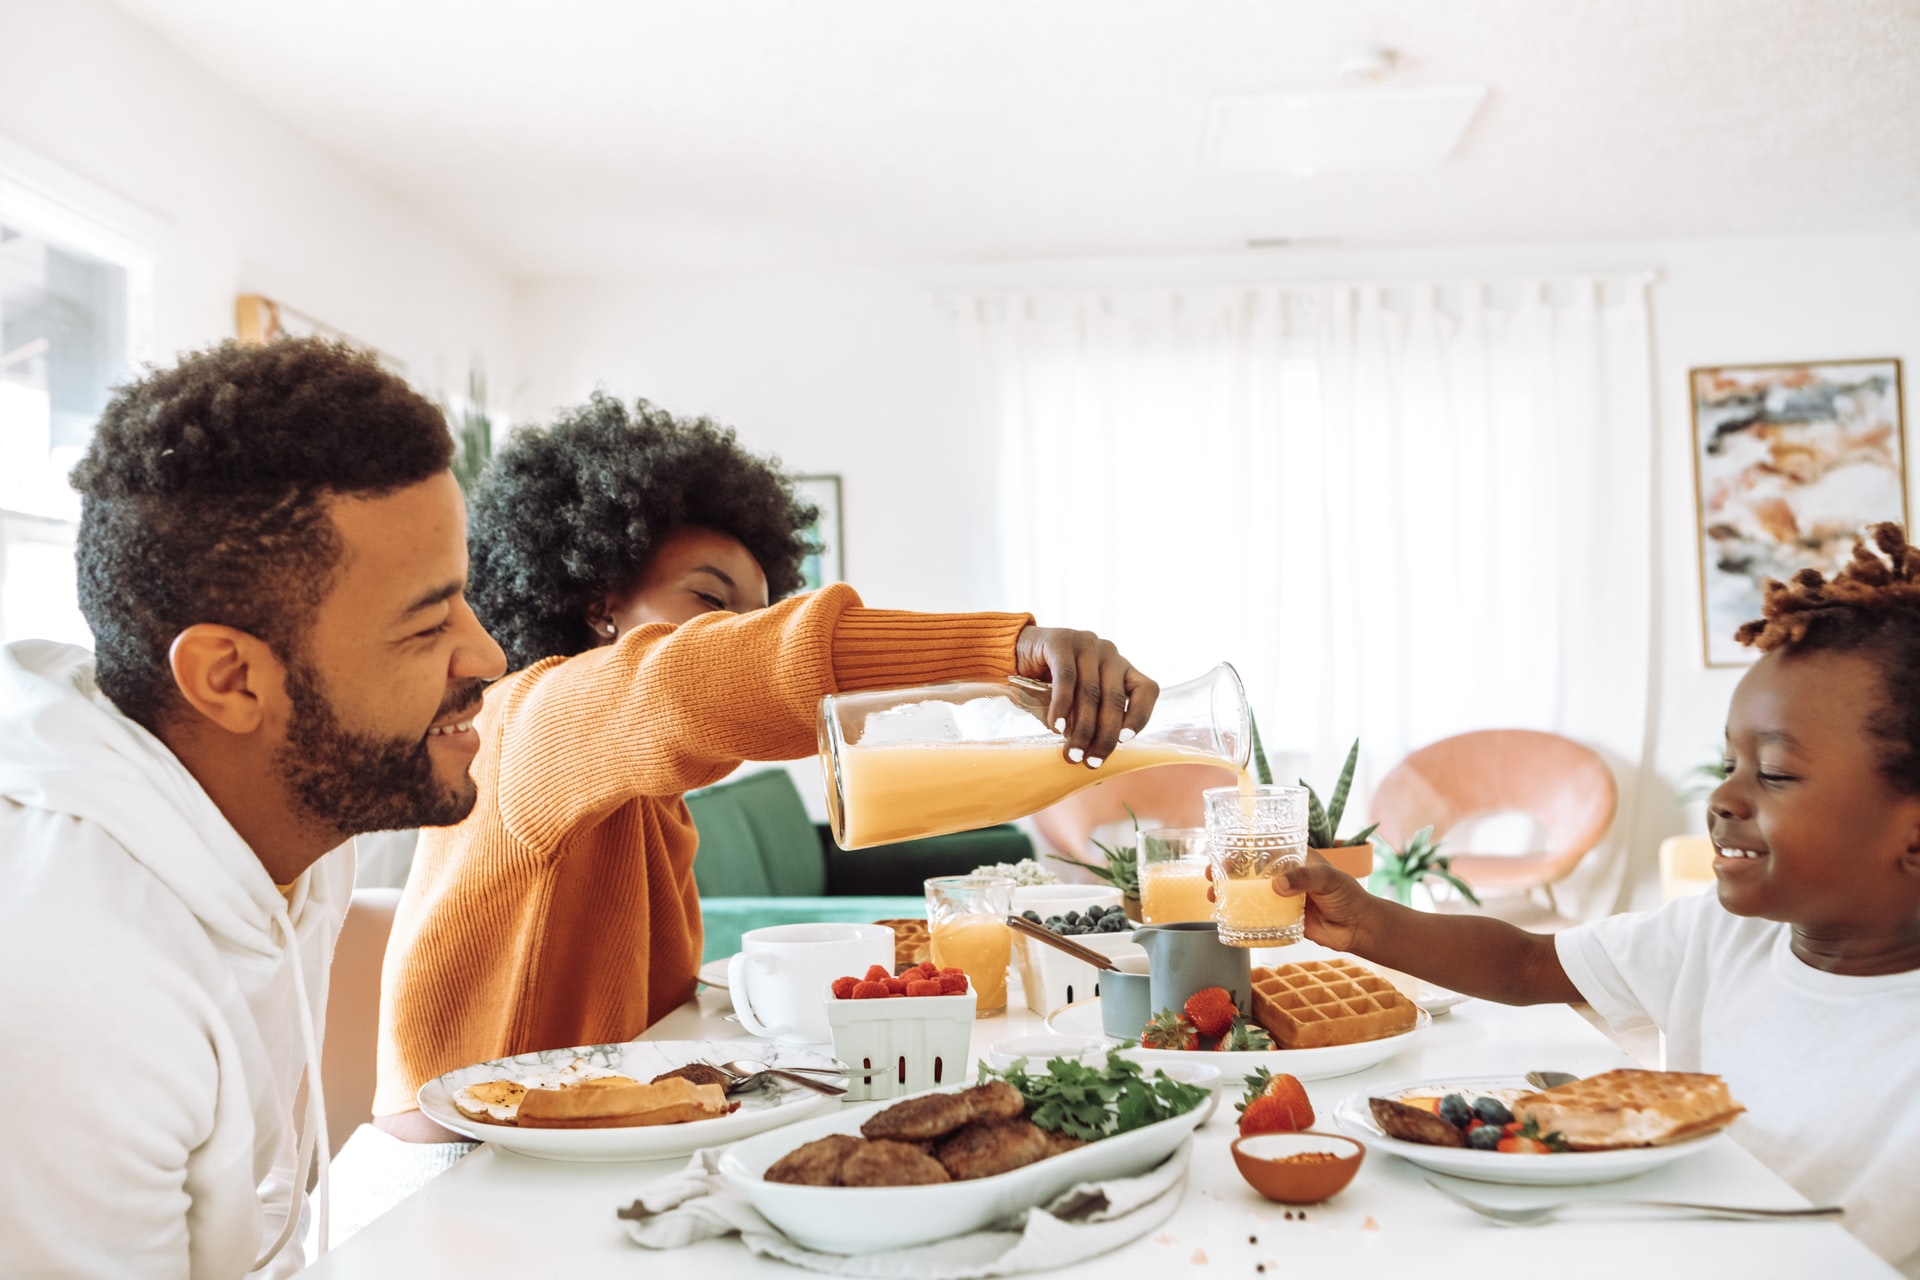 A family eating breakfast to represent sharing a family meal